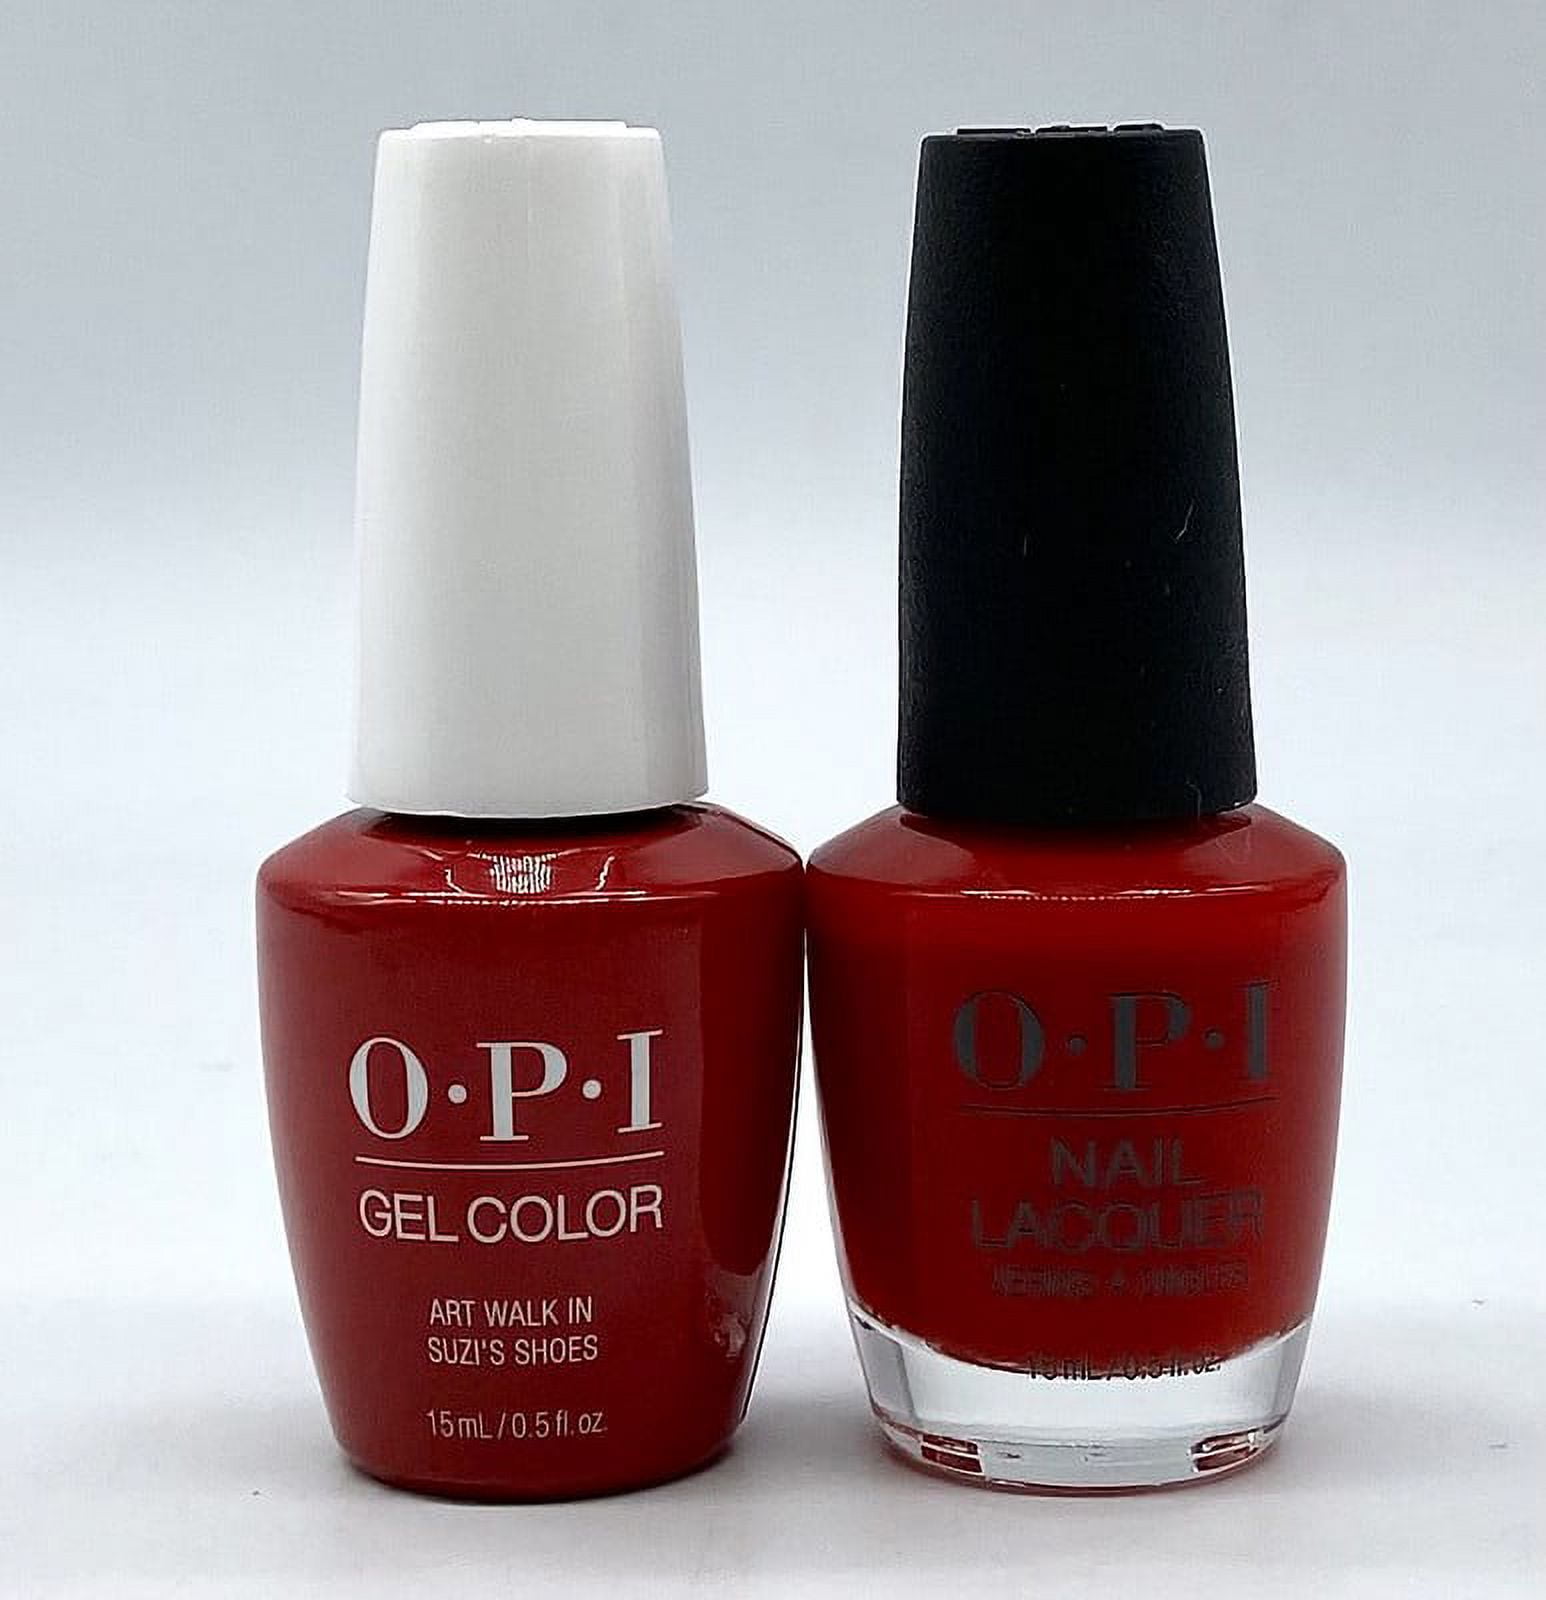 OPI Gelcolor Collection Soak-Off Nail Lacquer, Big Apple Red - 0.5 oz bottle